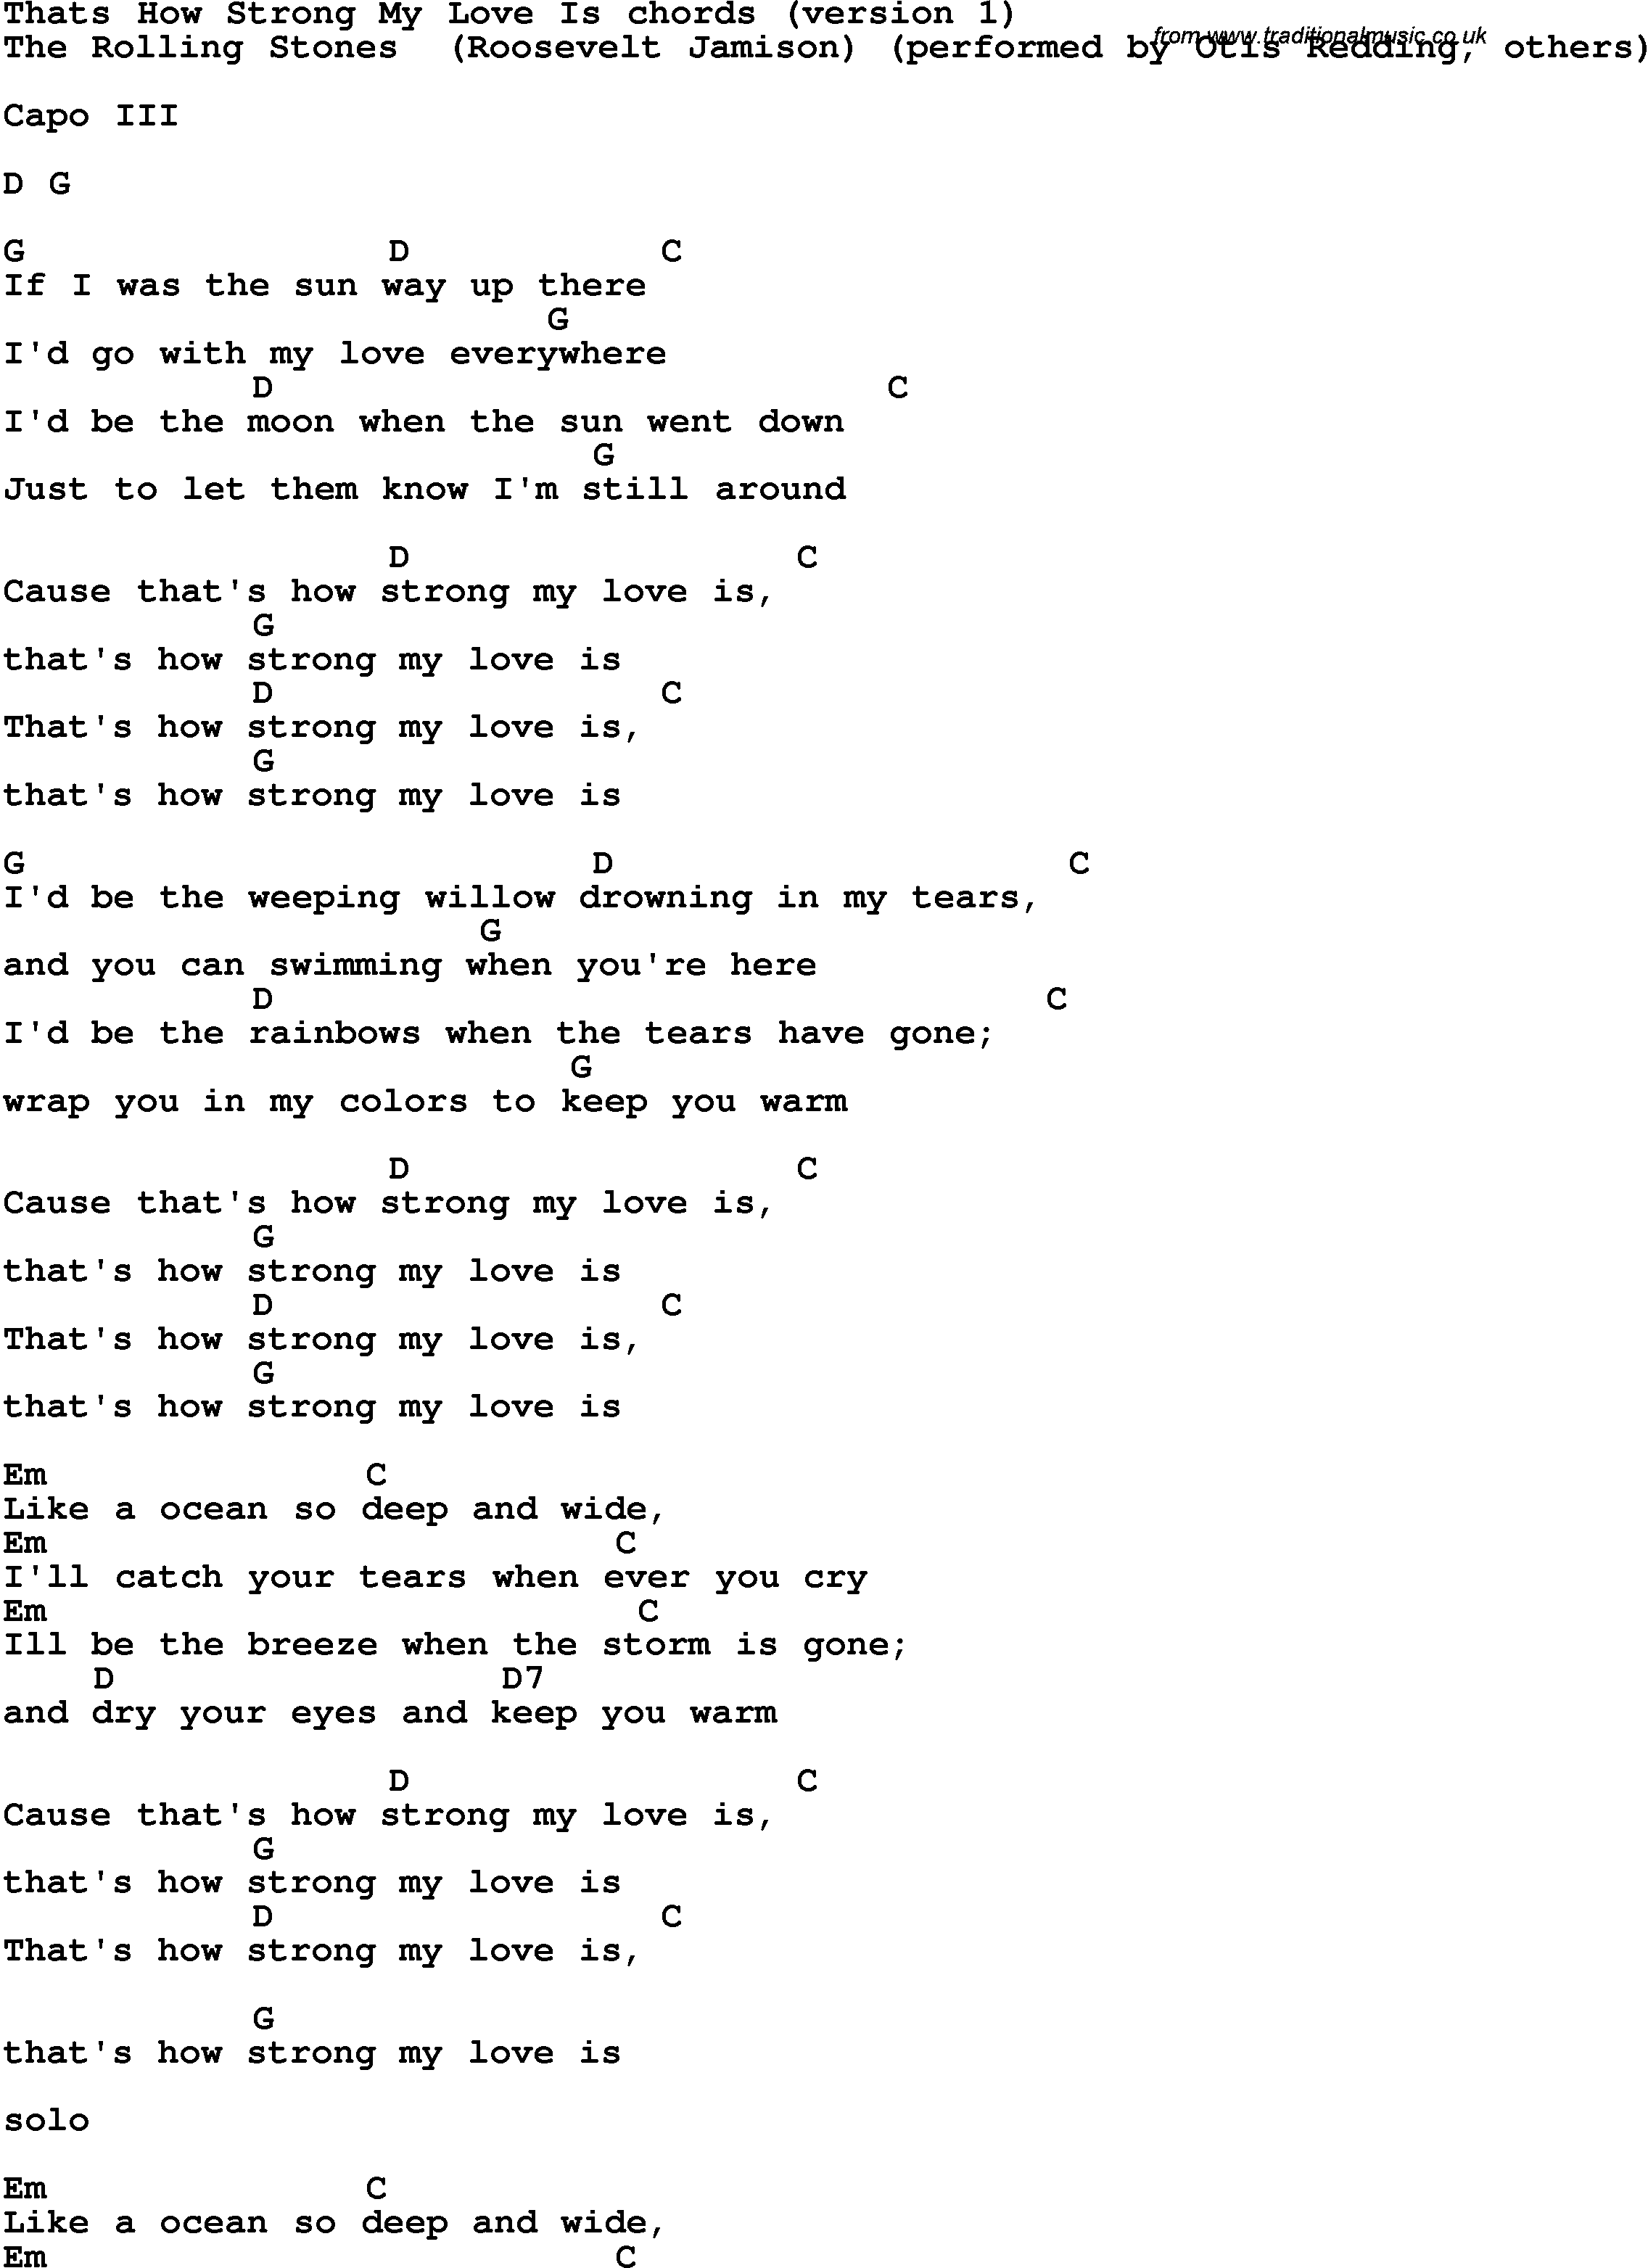 Song Lyrics with guitar chords for That's How Strong My Love Is